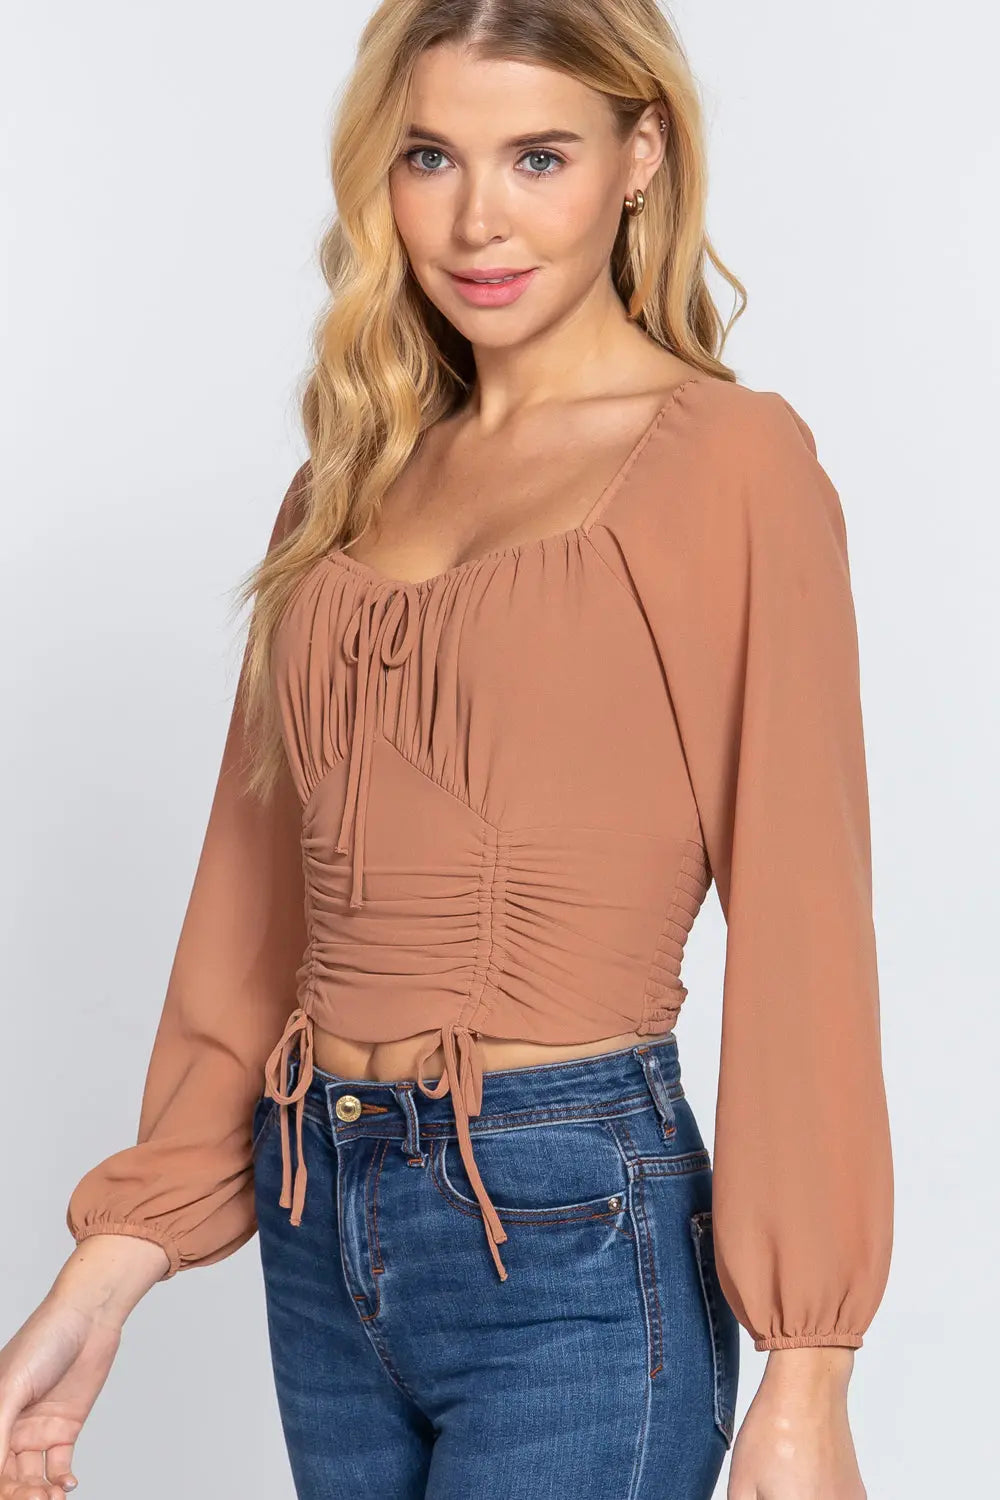 Long Sleeve Front Tied Ruched Detail Woven Top Sunny EvE Fashion